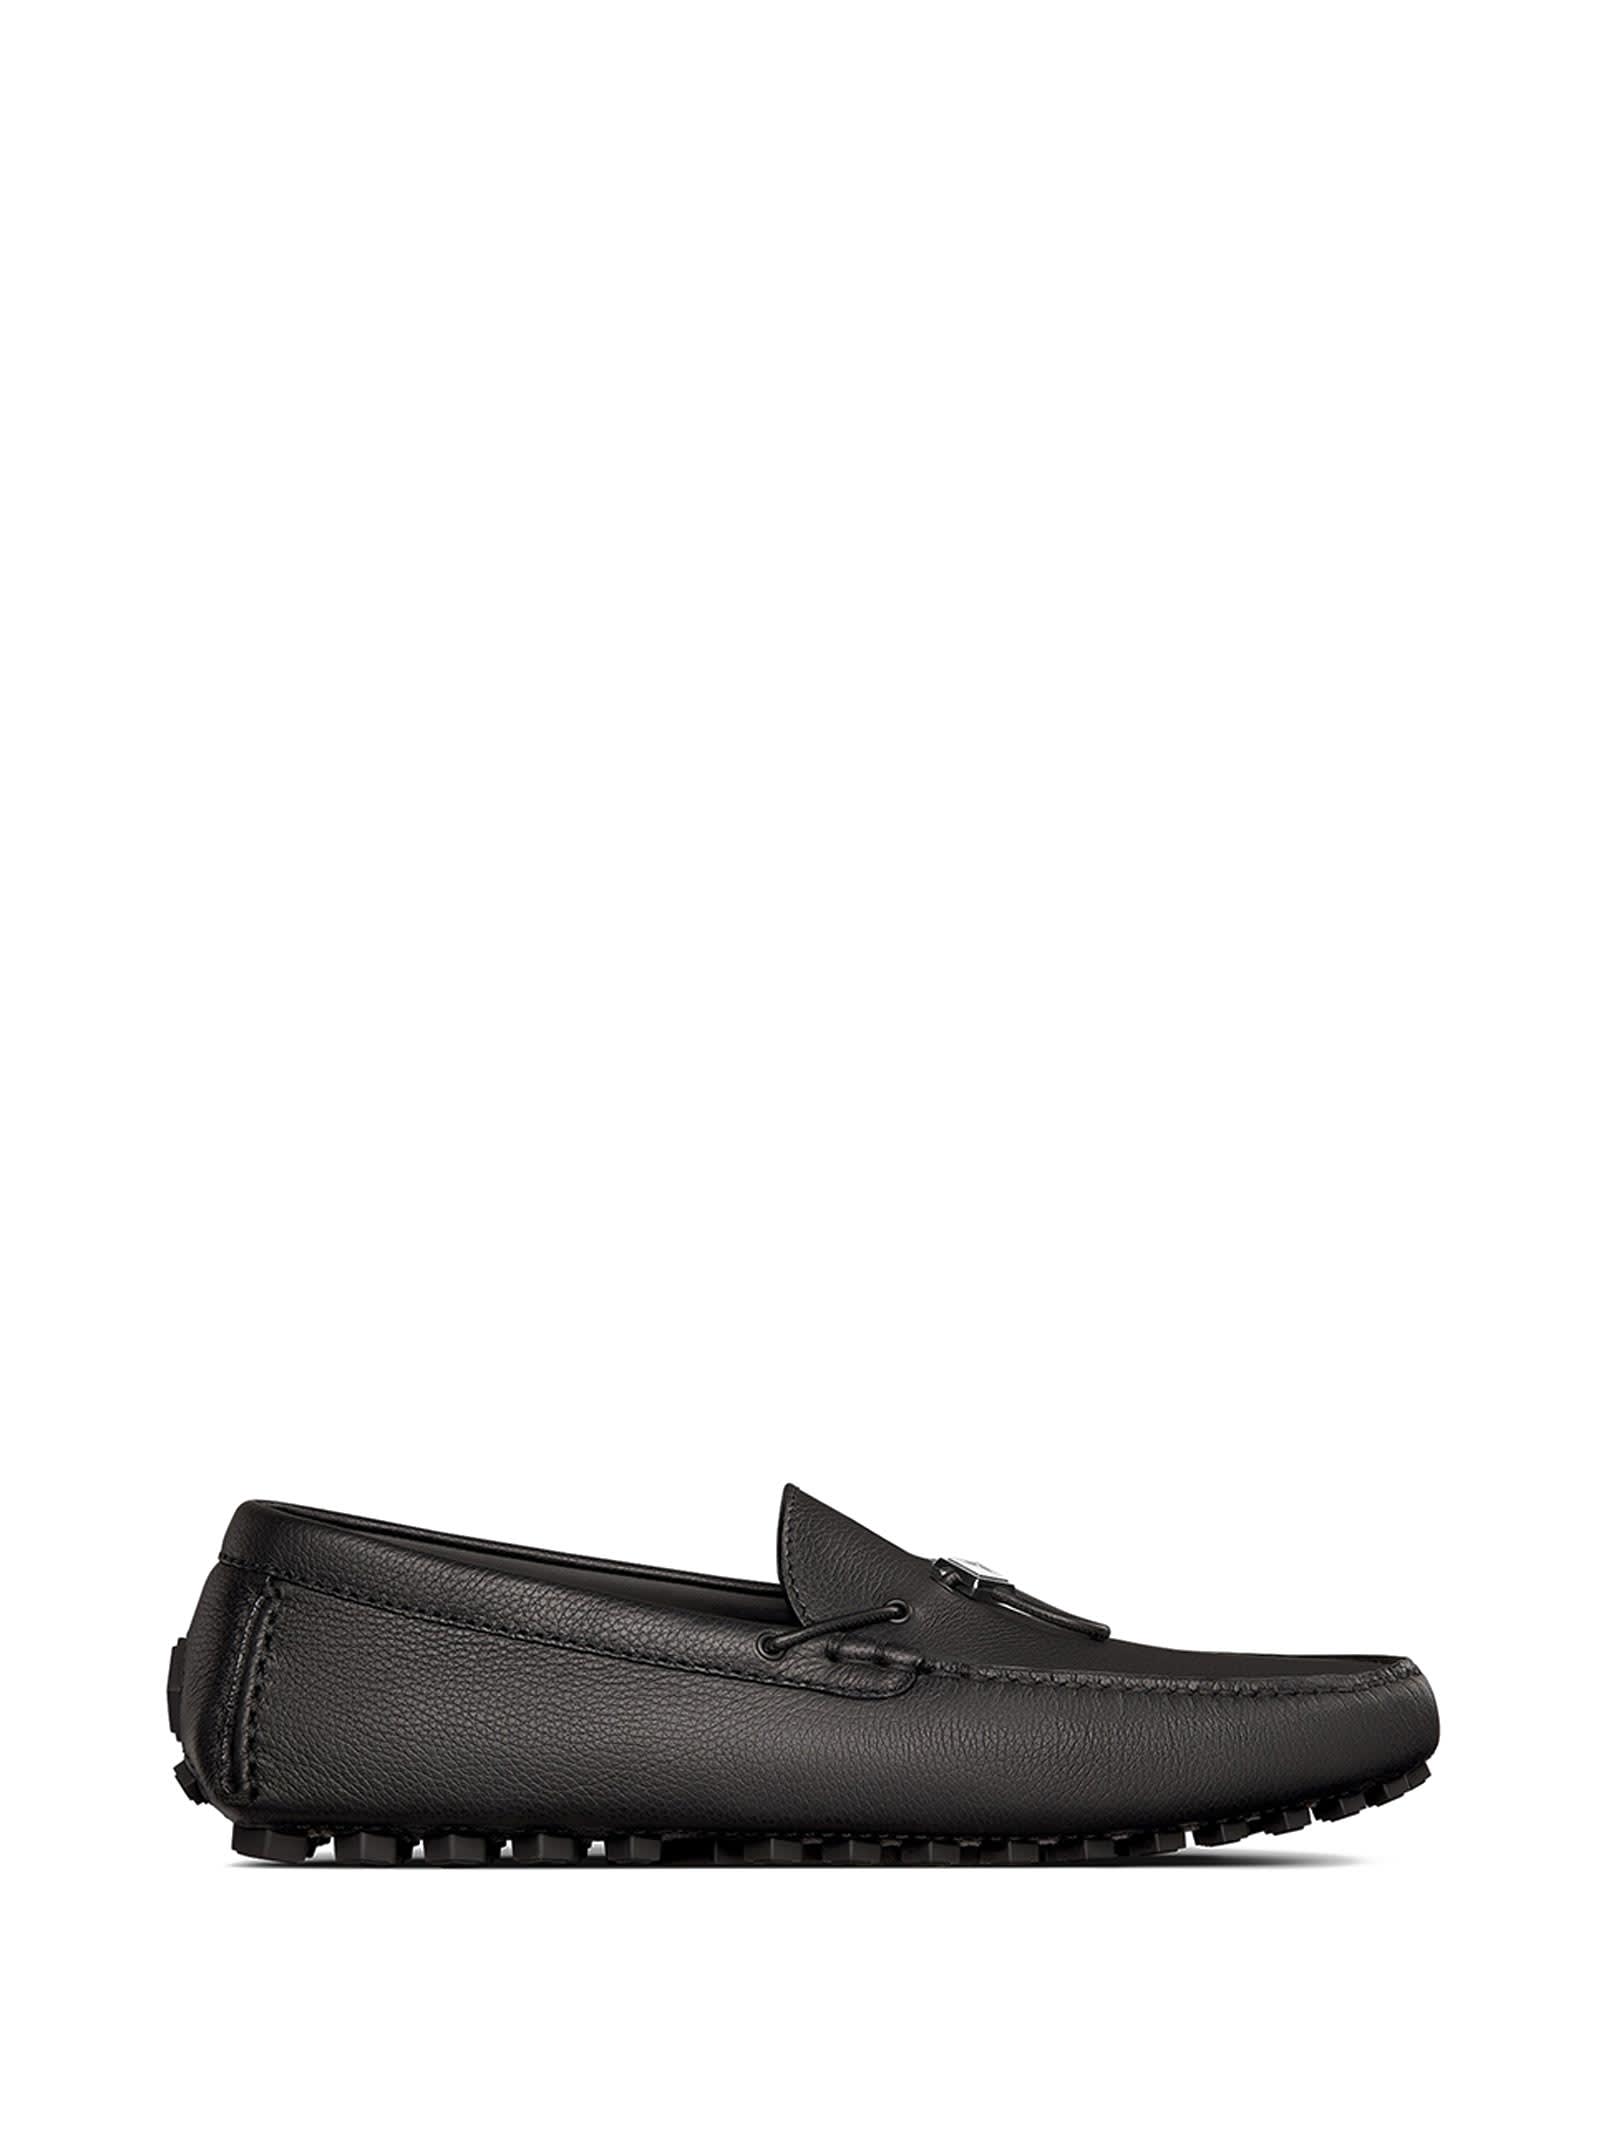 Dior Homme Loafers